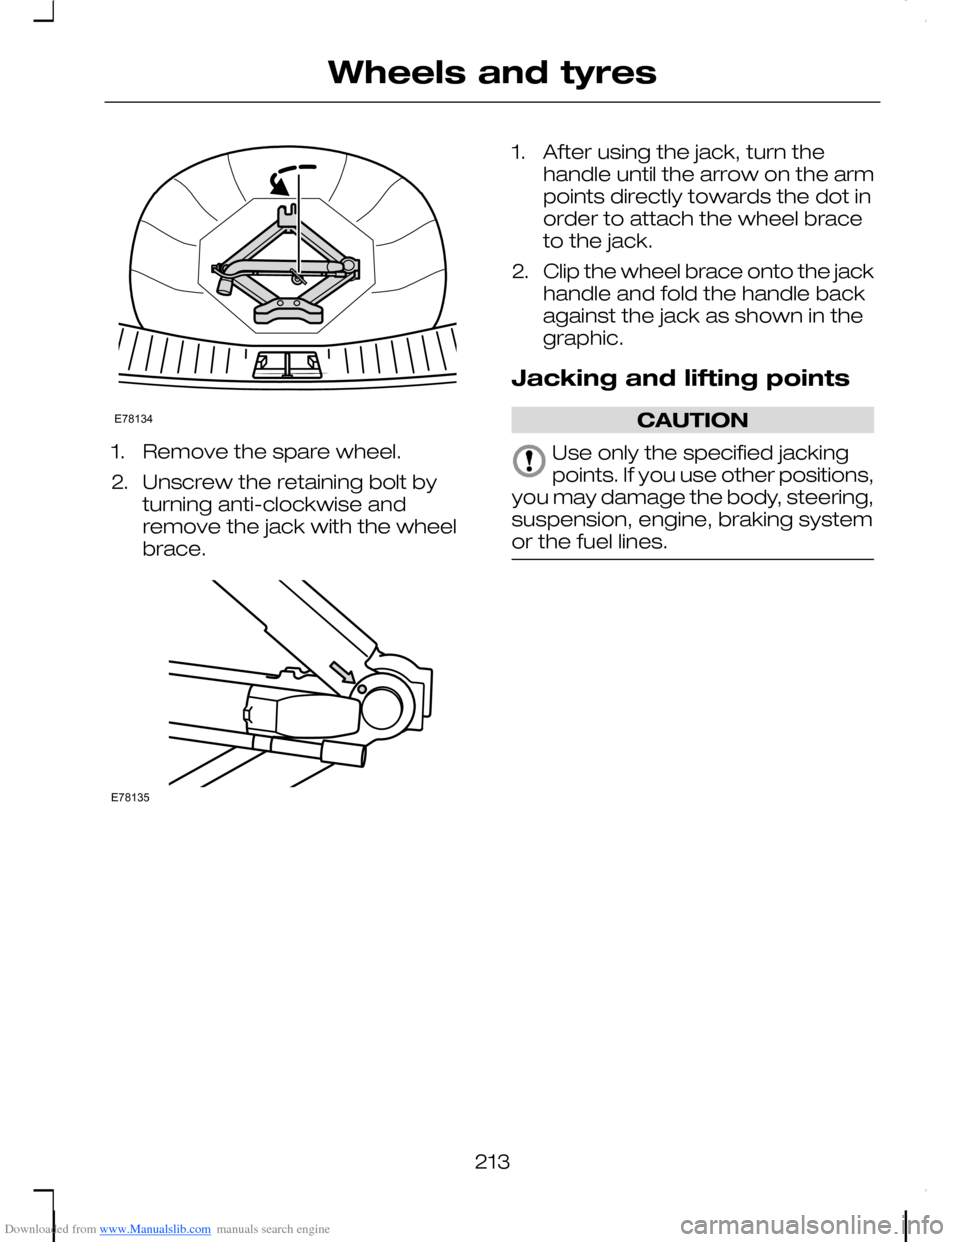 FORD C MAX 2008 1.G Owners Manual Downloaded from www.Manualslib.com manuals search engine 1.Remove the spare wheel.
2.Unscrew the retaining bolt byturning anti-clockwise andremove the jack with the wheelbrace.
1.After using the jack,